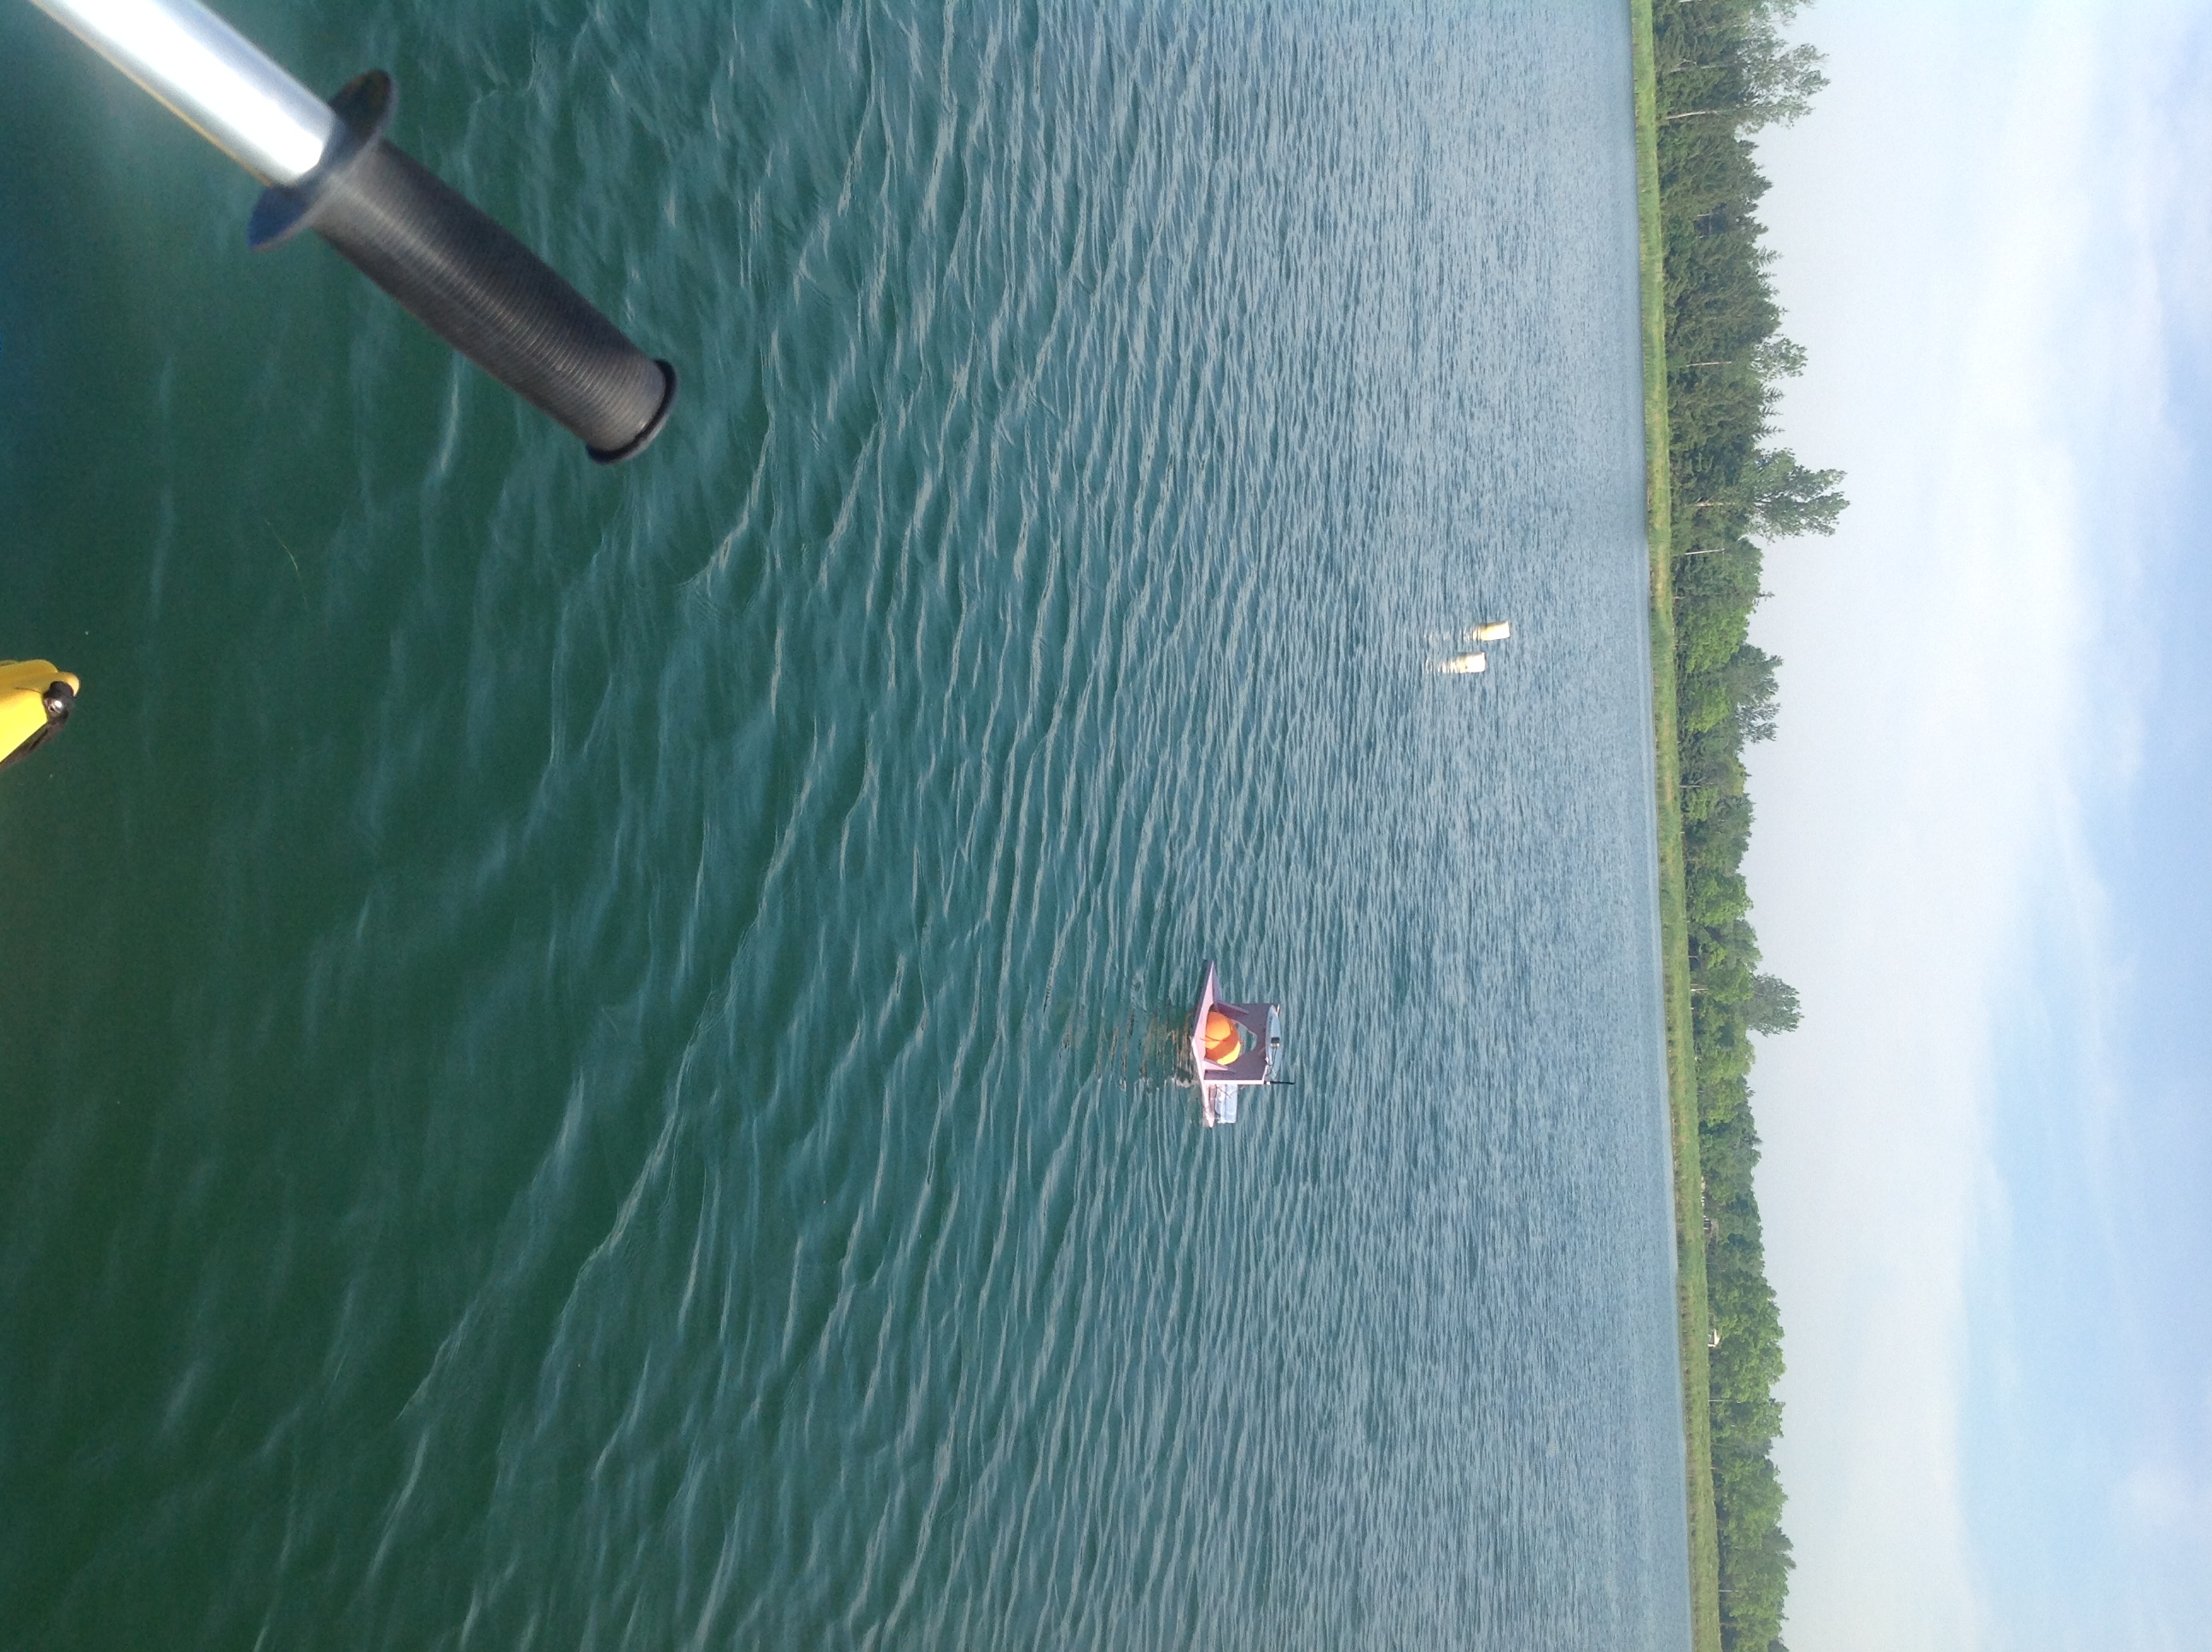 GPS Rover on a ball in the lake